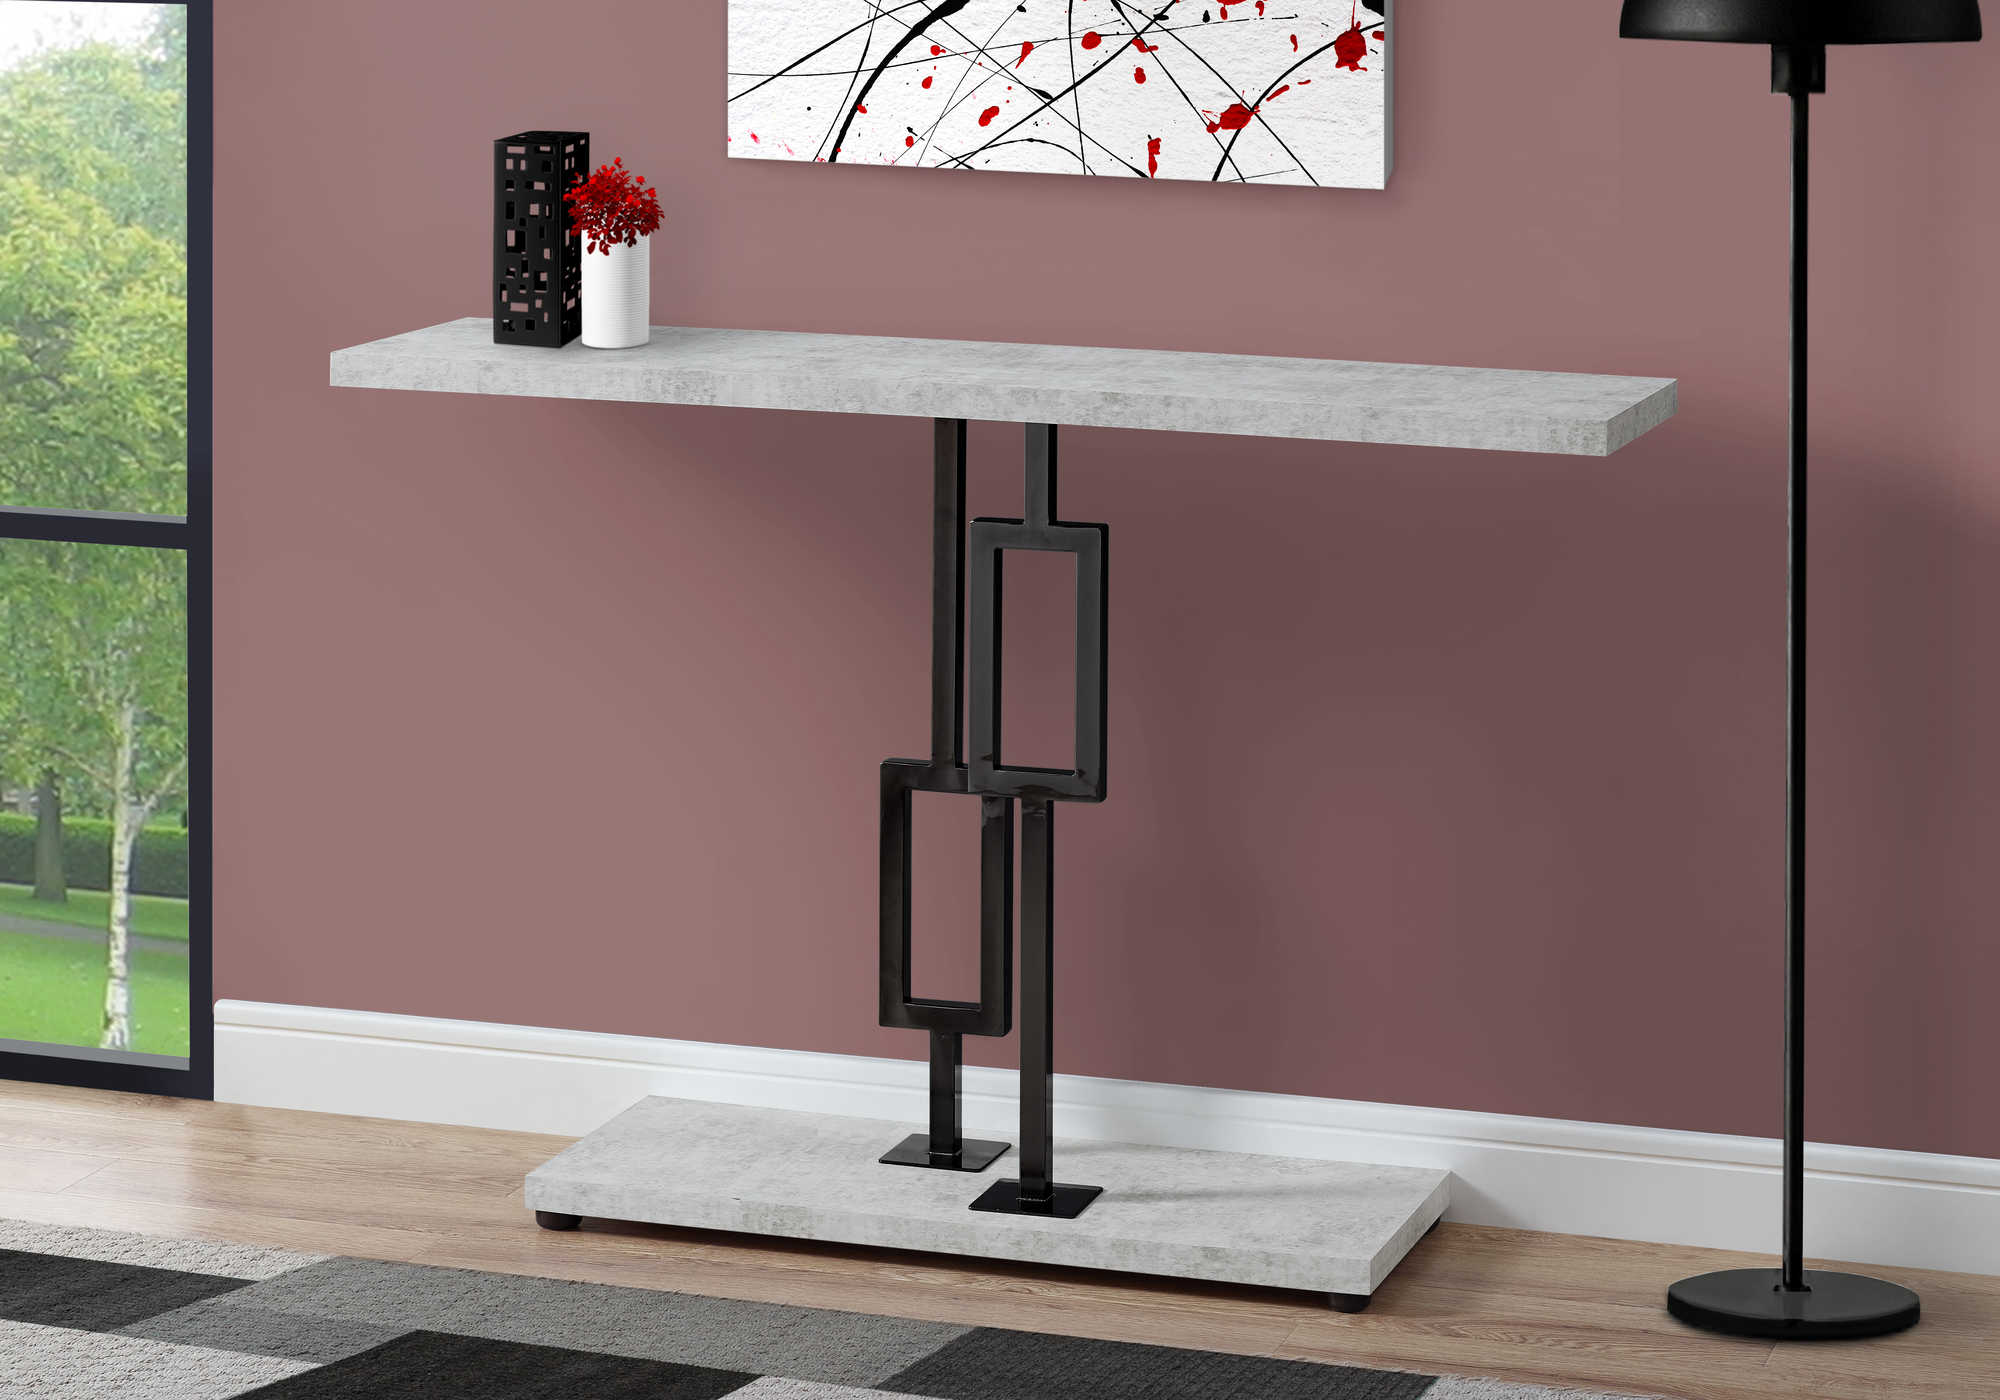 ACCENT TABLE - 48"L / GREY CEMENT / BLACK NICKEL METAL